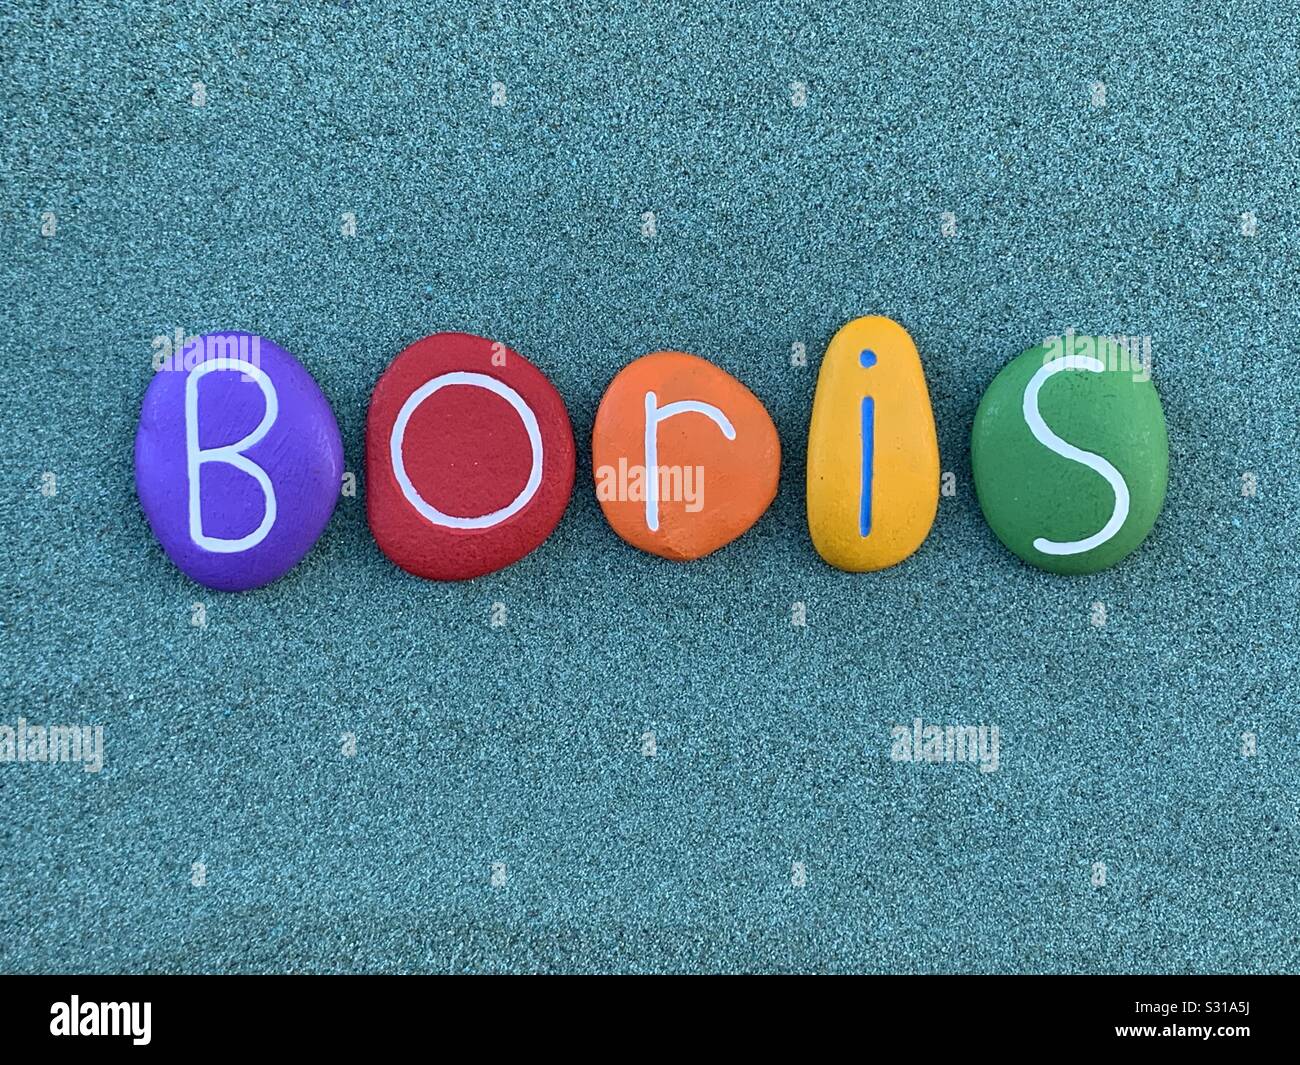 Boris, male given name composed with multi colored stone letters over green sand Stock Photo